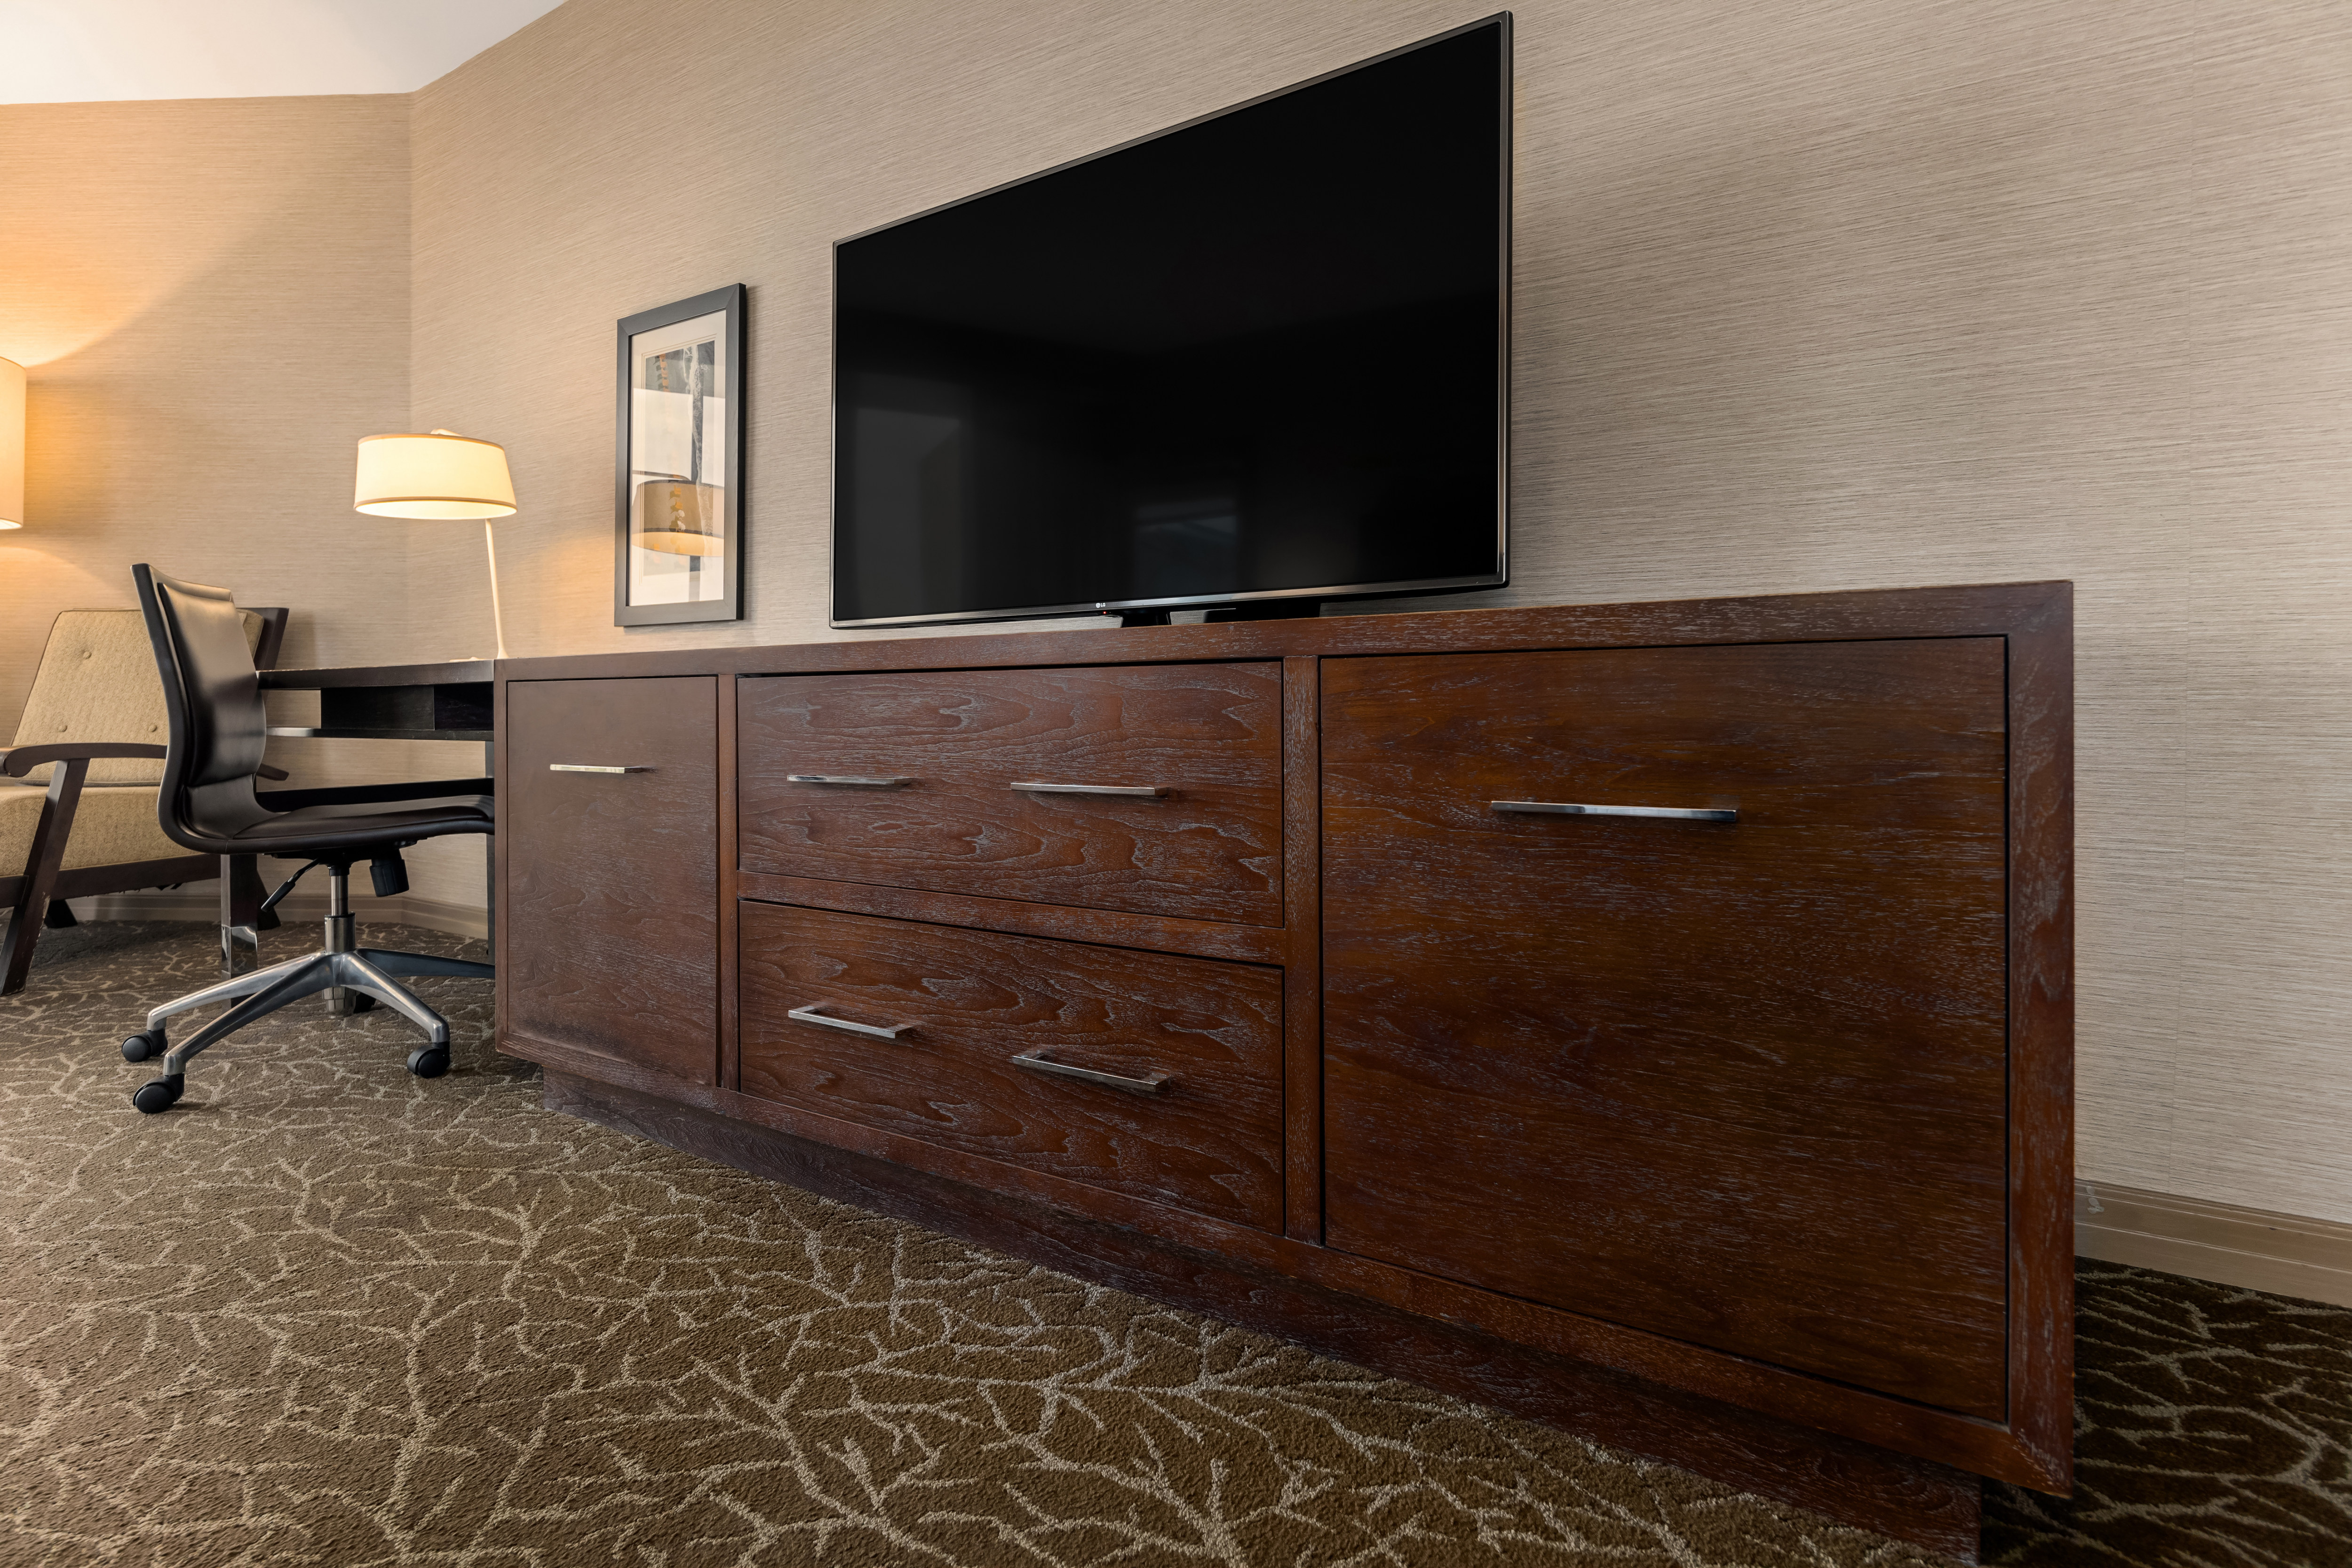 Desk Area and HDTV in Hotel Suite